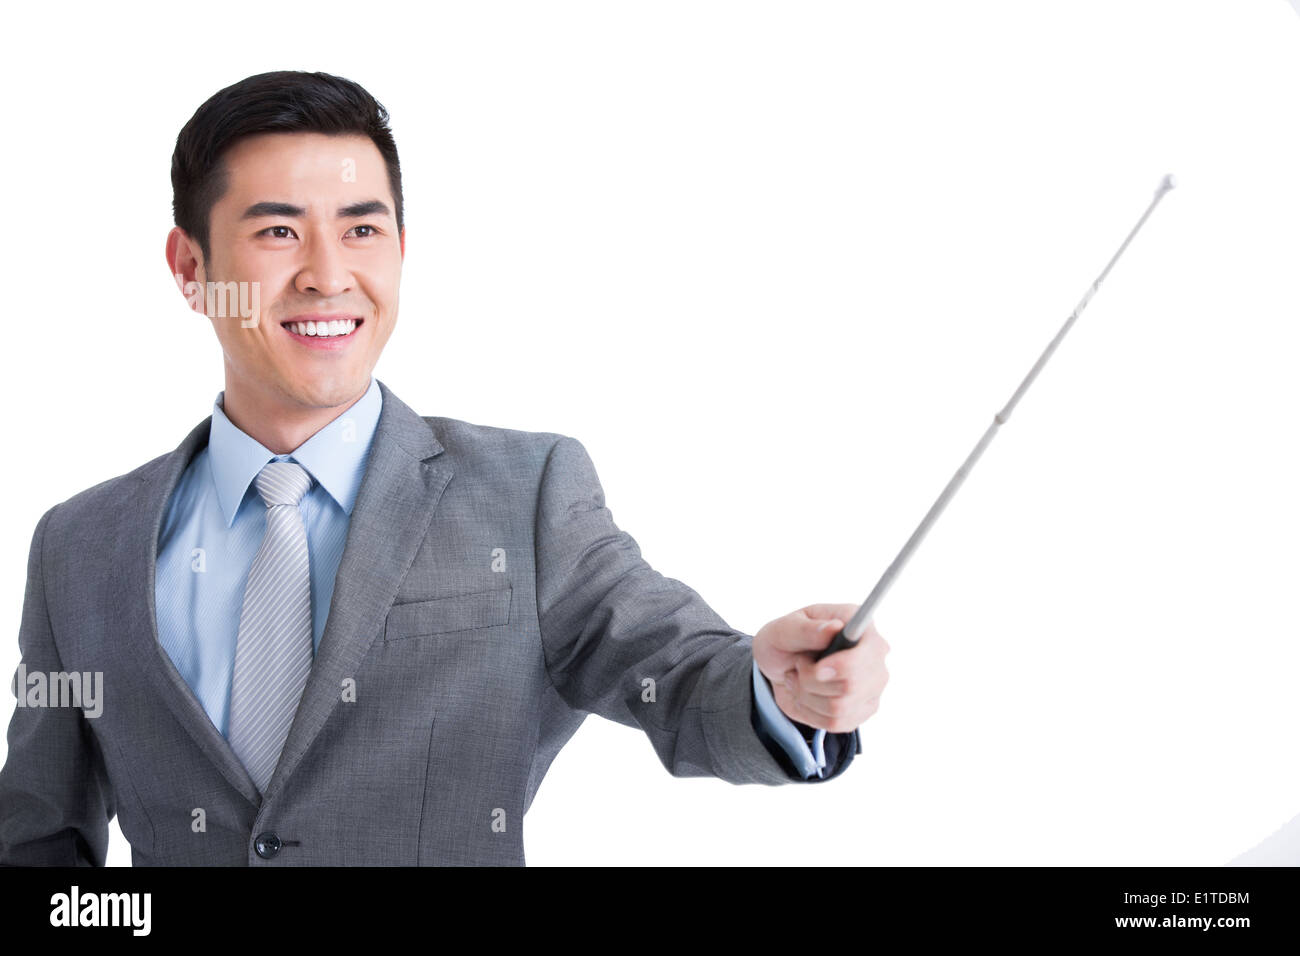 Male training specialist with pointer stick Stock Photo